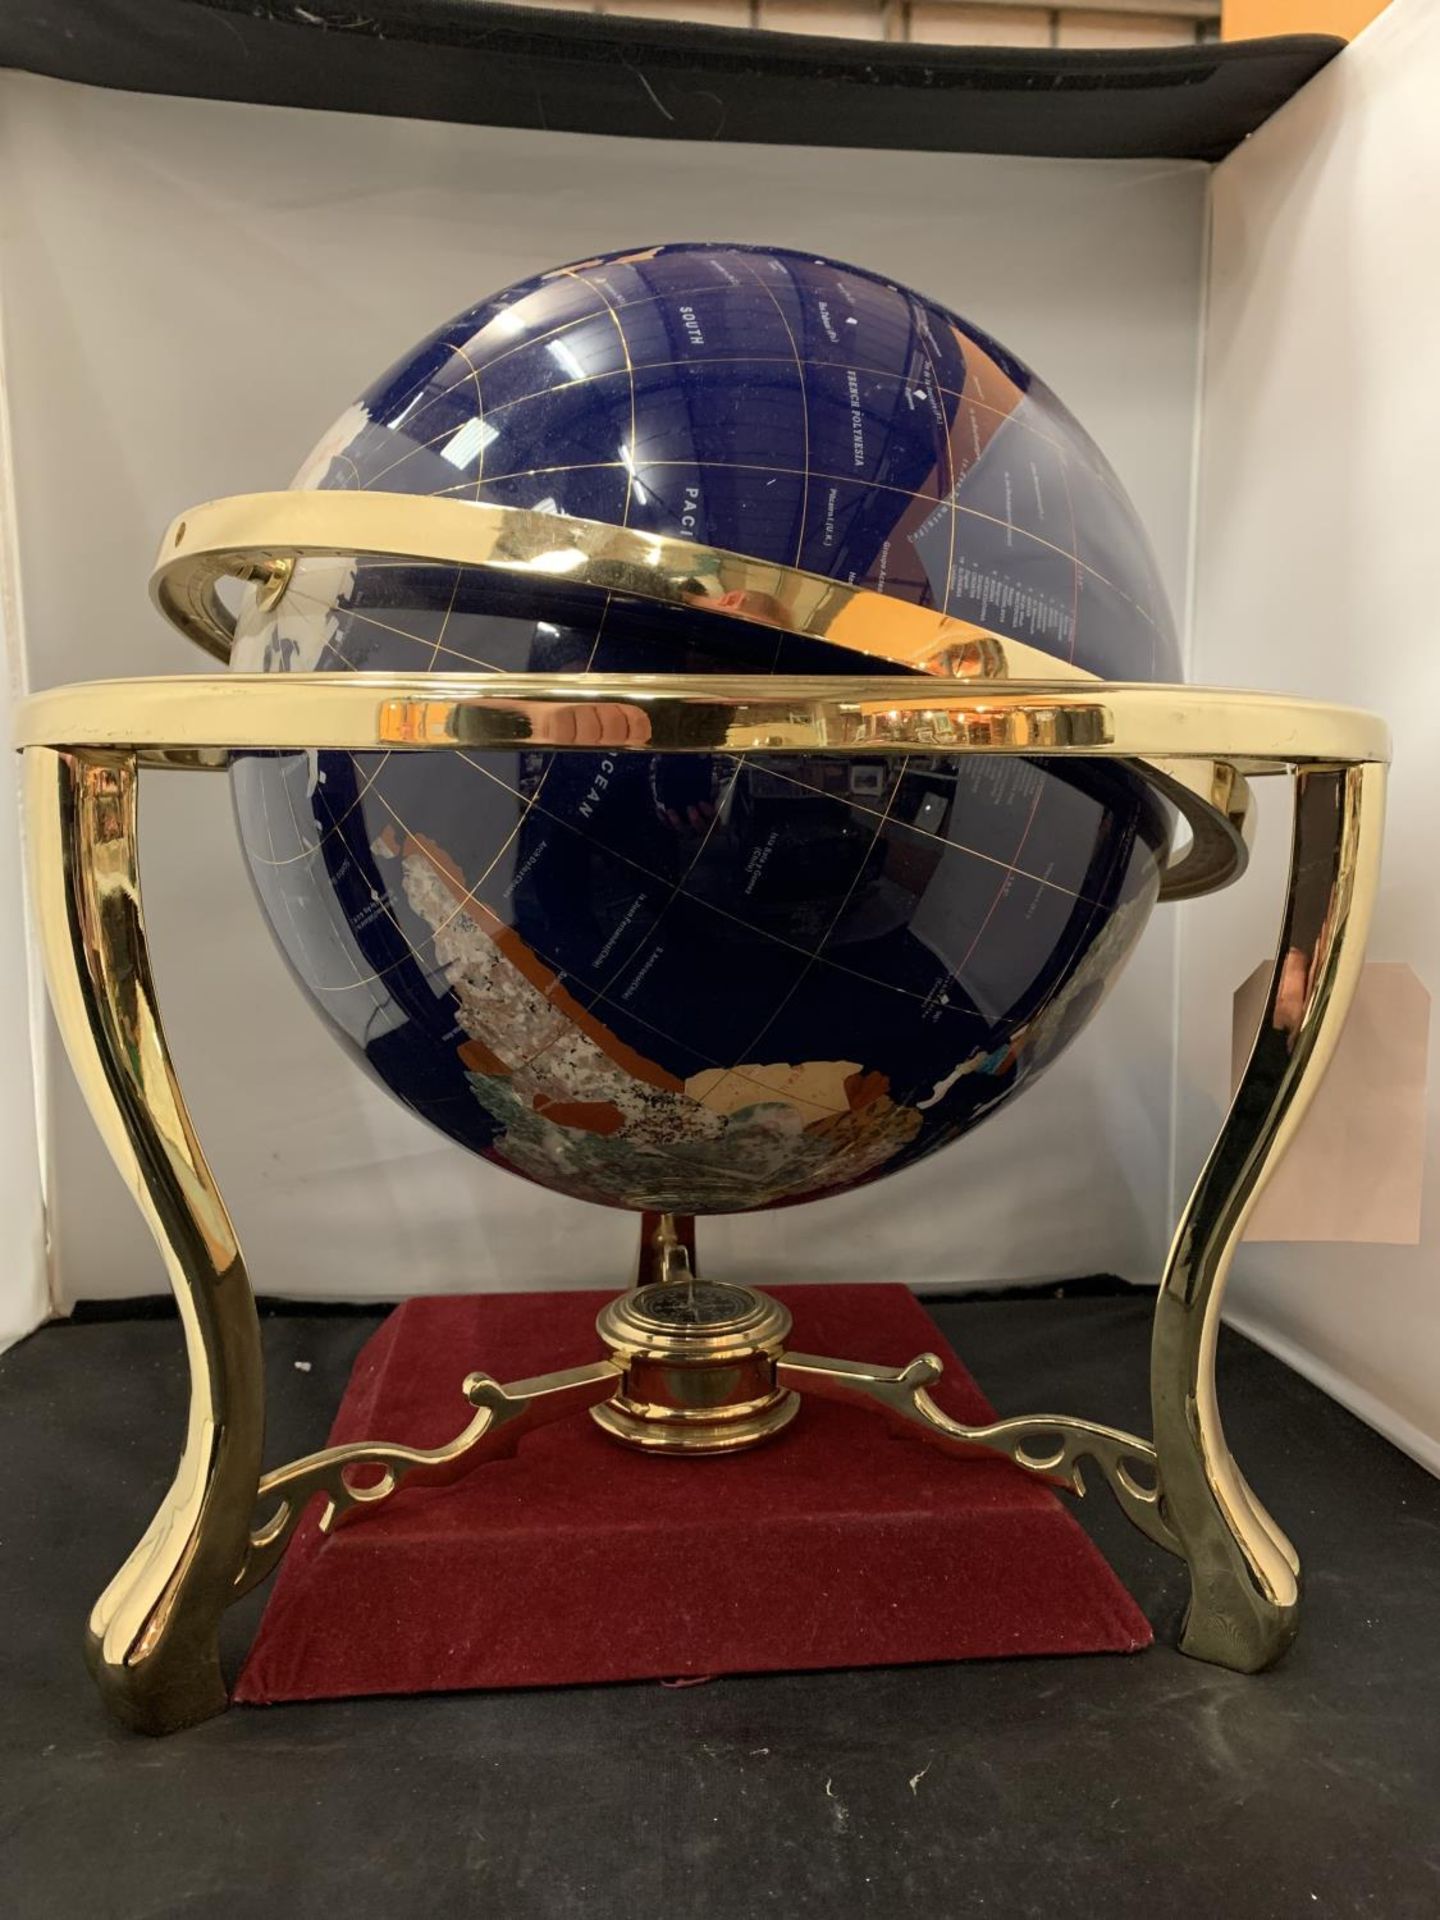 A LAPIZ LAZULI AGATE GEMSTONE HANDCRAFTED LARGE GLOBE INCORPORATING A COMPASS H:46CM - Image 3 of 4